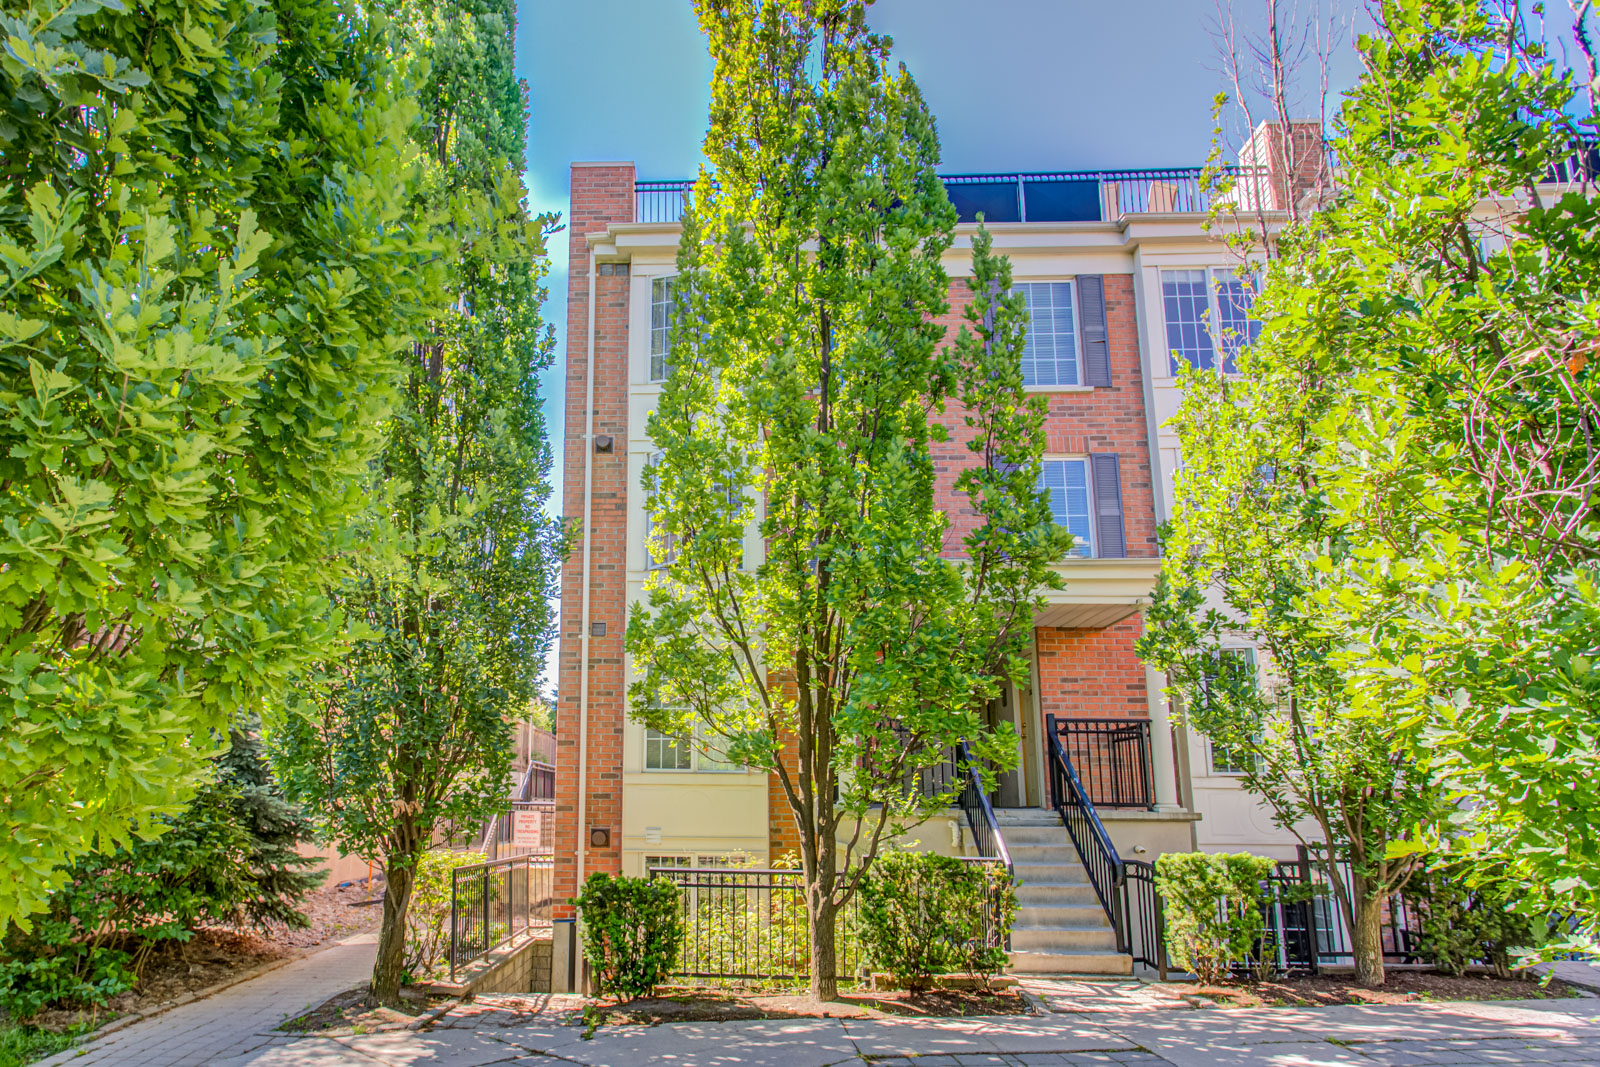 2-storey redbrick condo townhouse surrounded by trees.